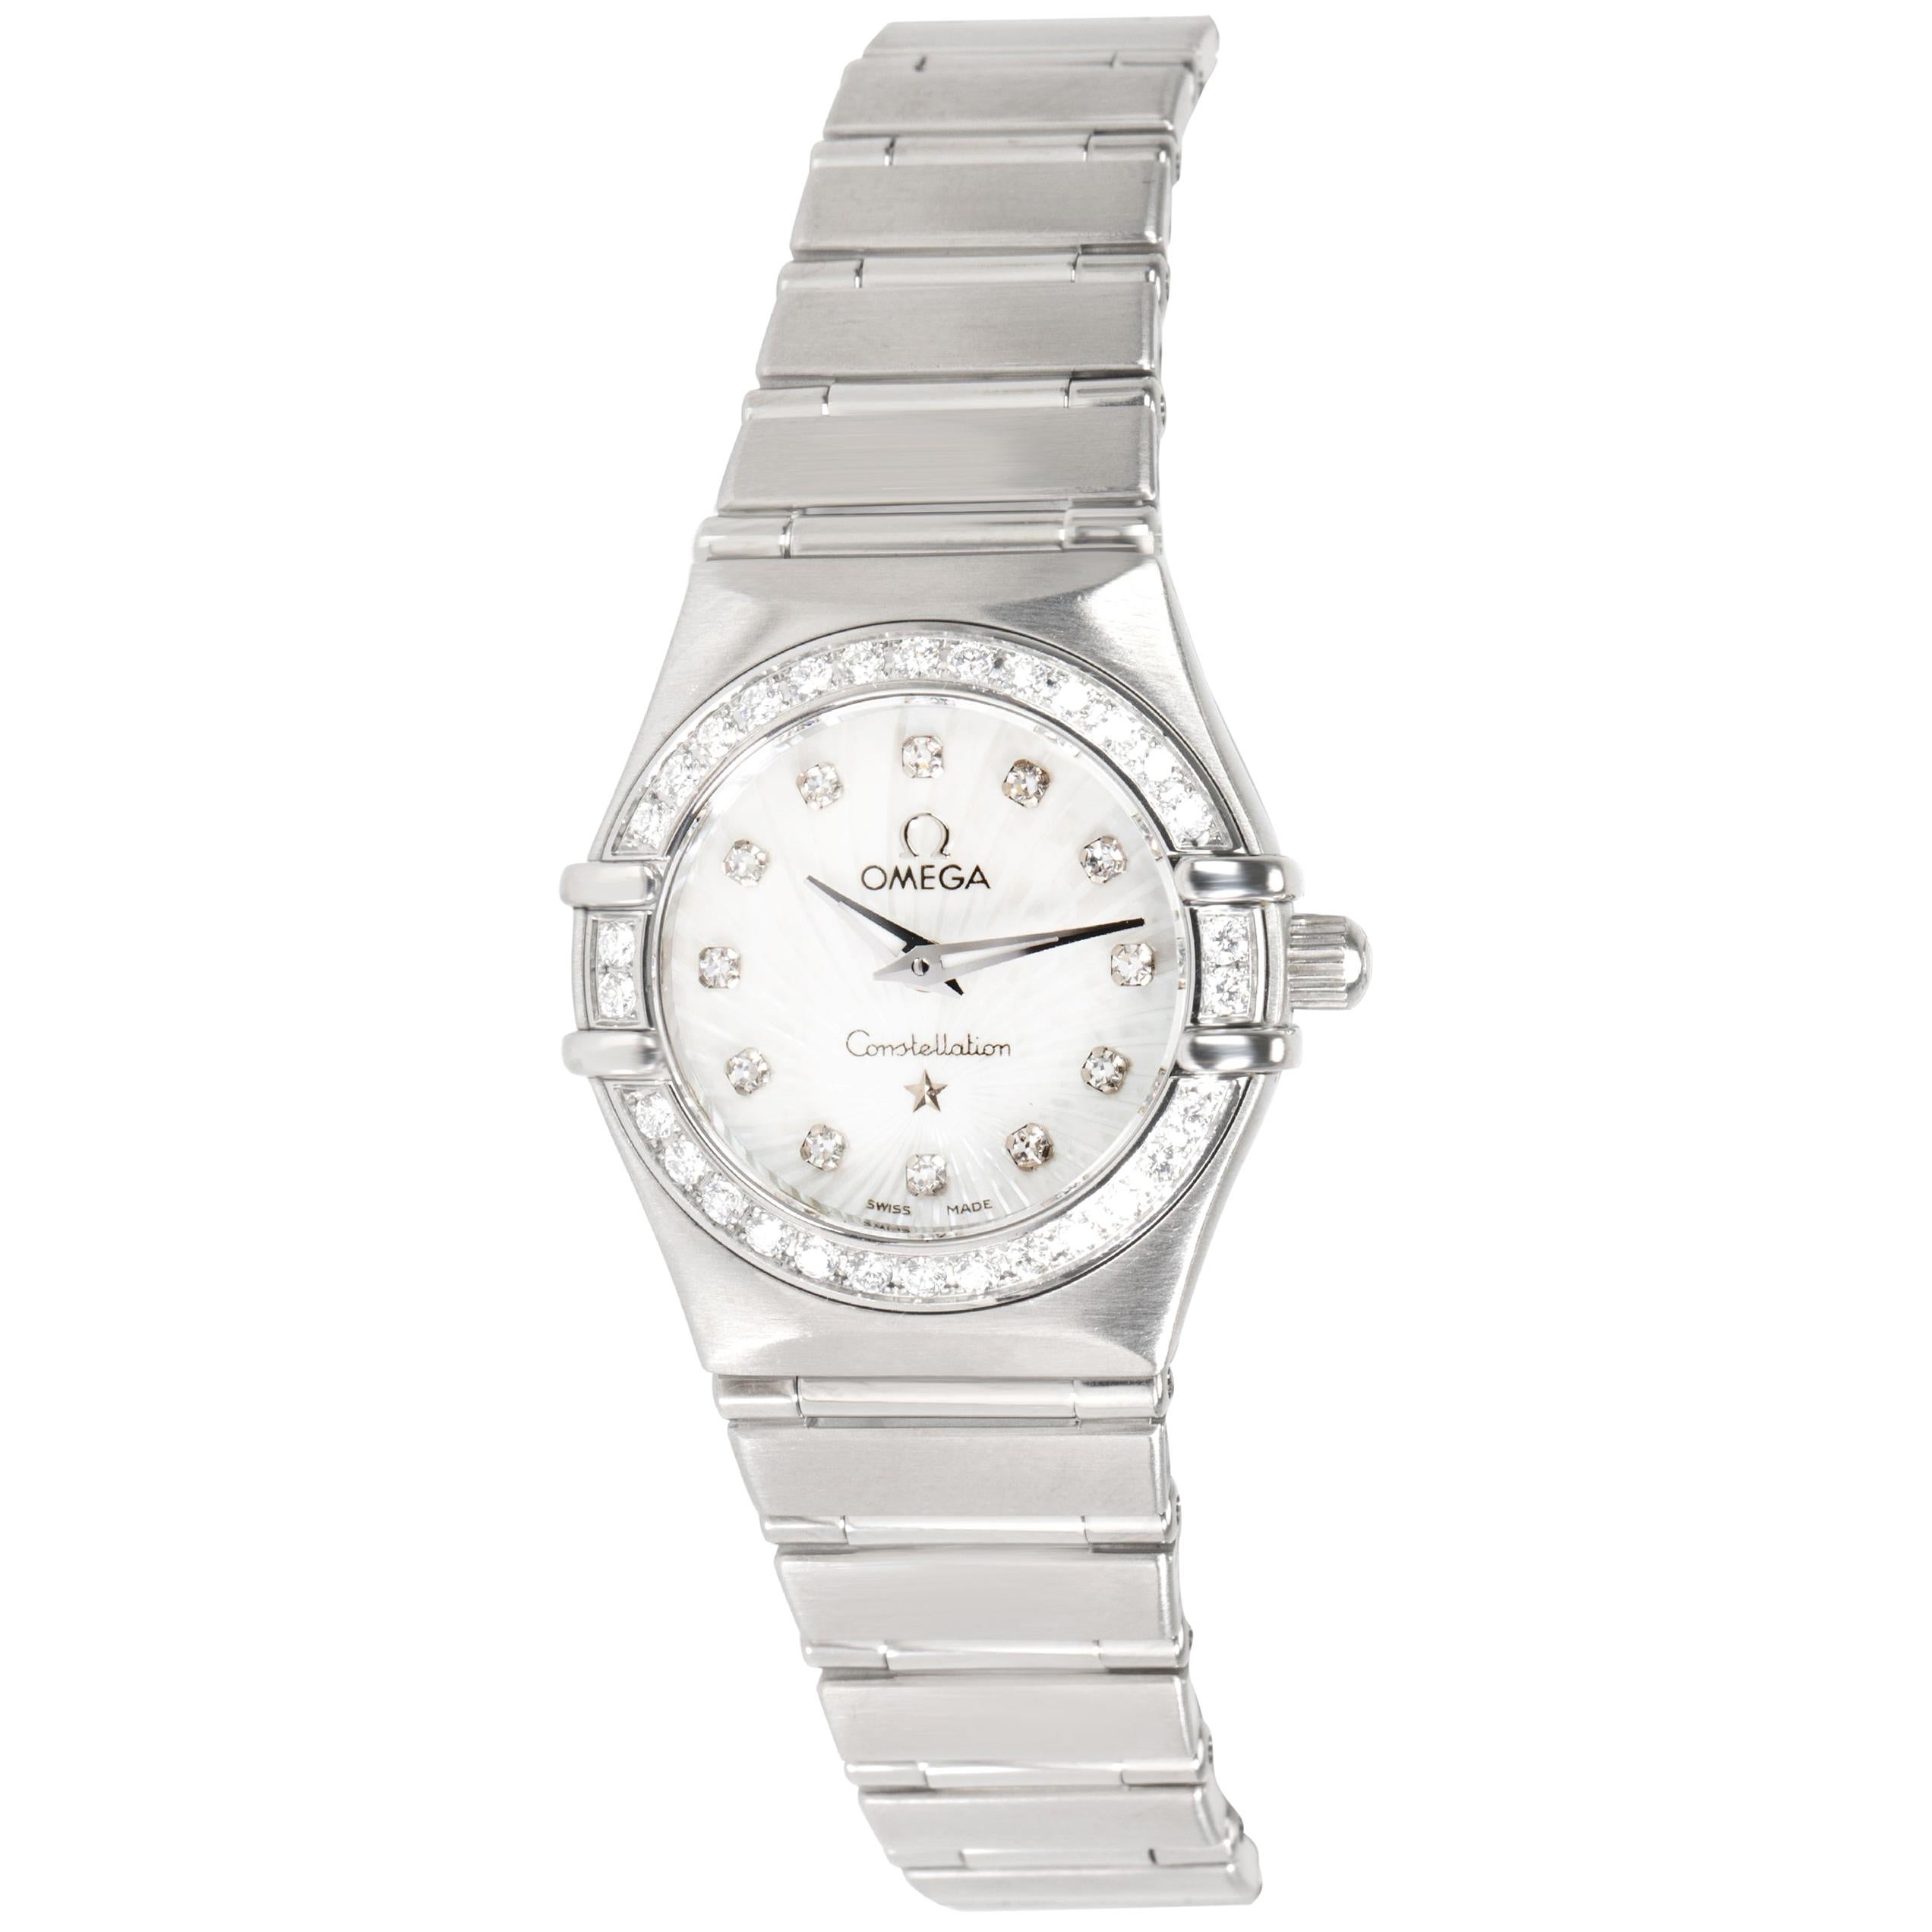 Omega Constellation 111.15.23.60.55.001 Women's Watch in Stainless Steel